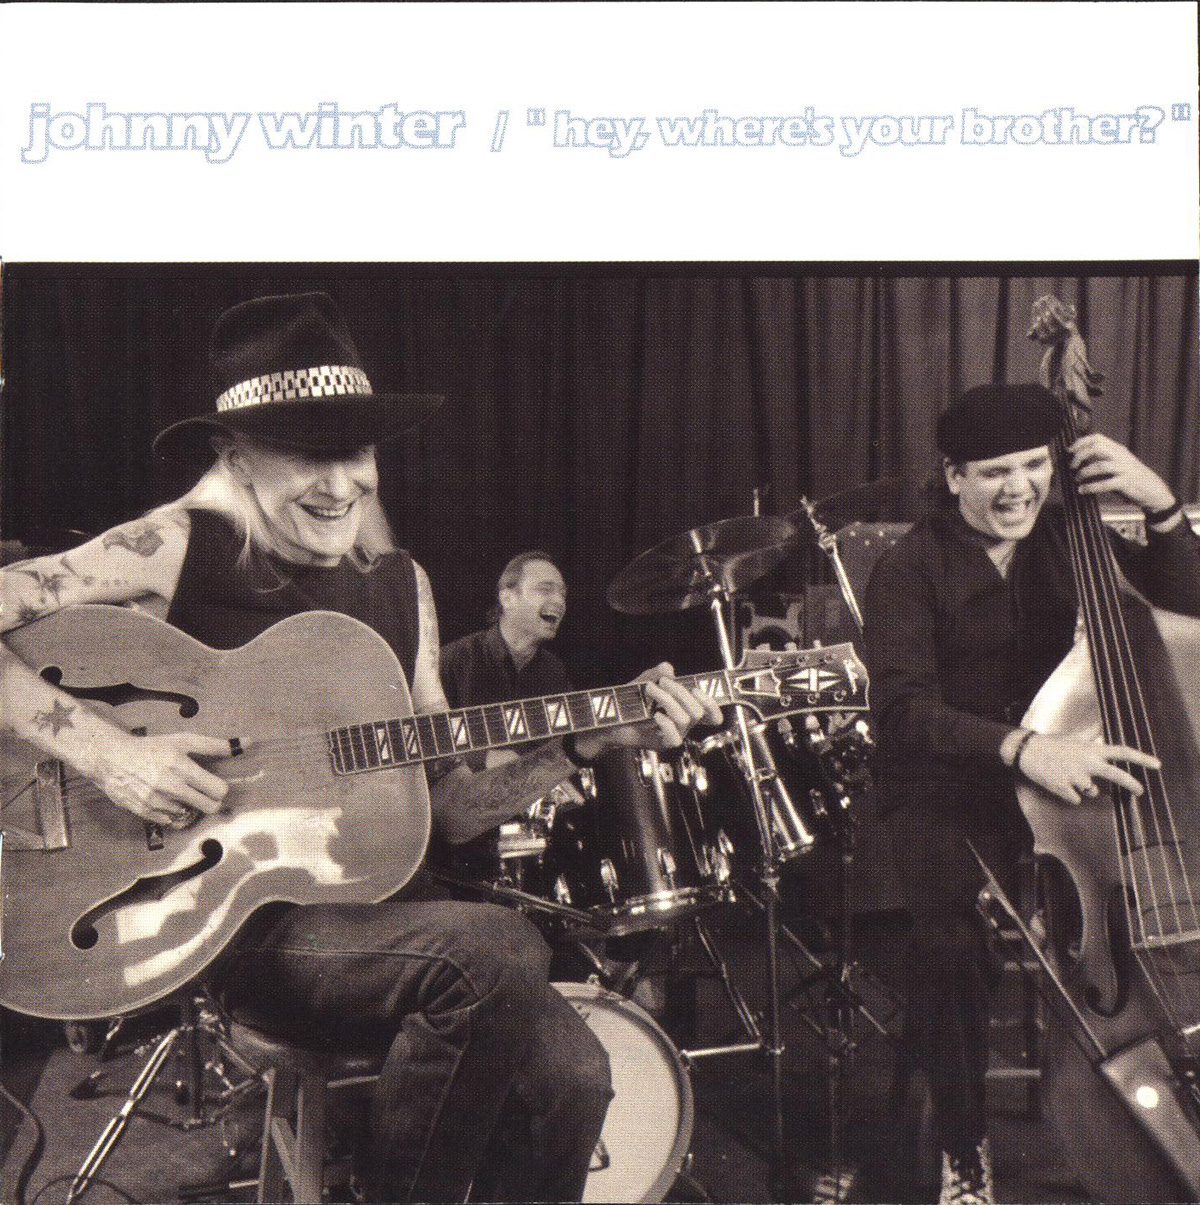 Album Front Cover Photo of JOHNNY WINTER - Hey Where's Your Brother?